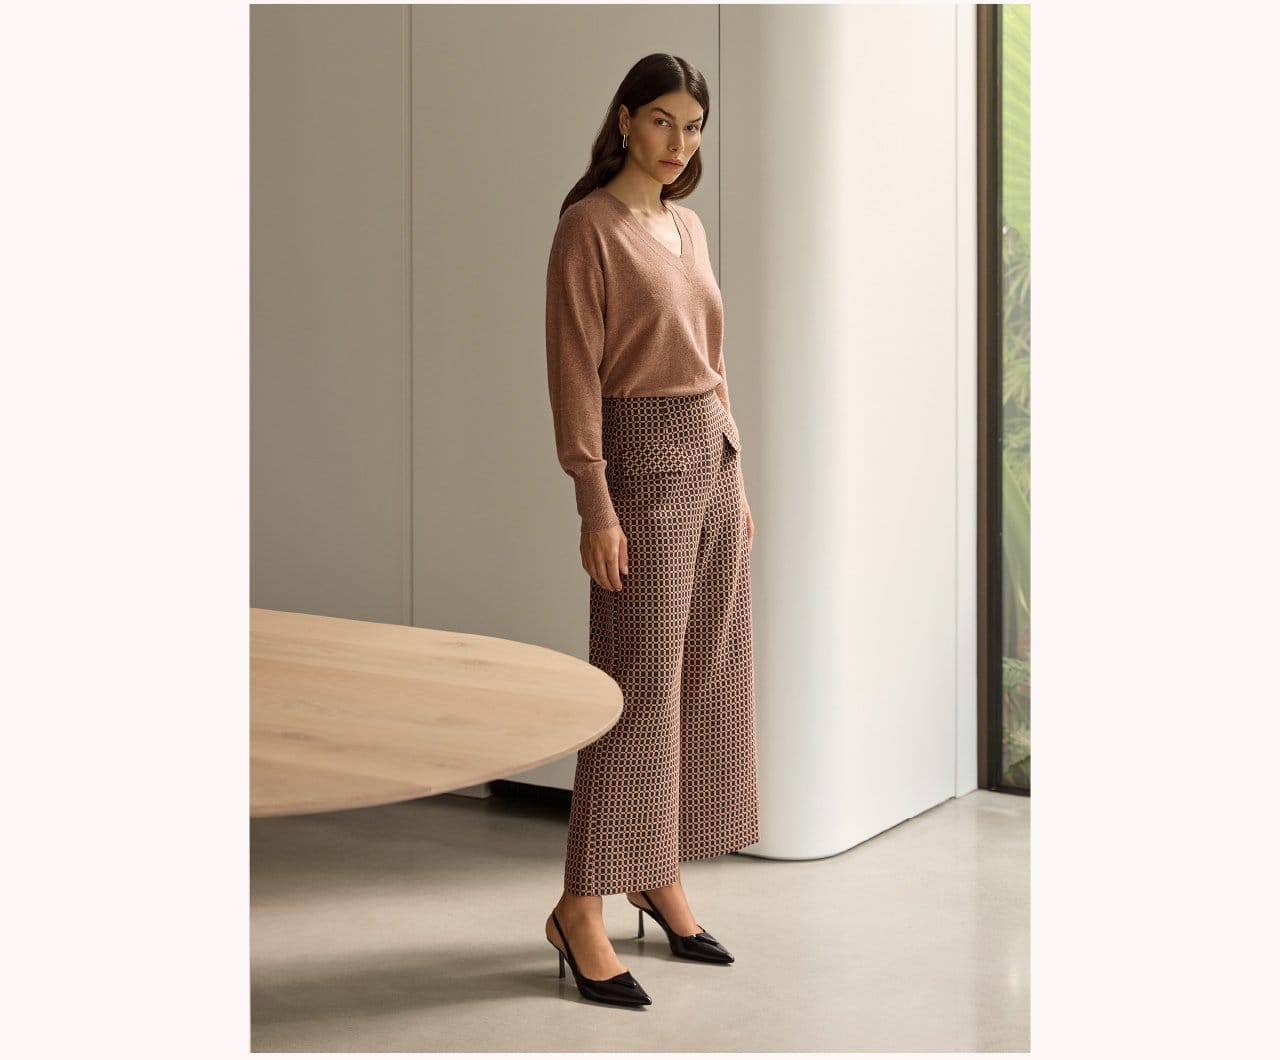 The model is wearing Deco Check Cropped Pants paired with Cashmere Merino Blend V-Neck Sweater